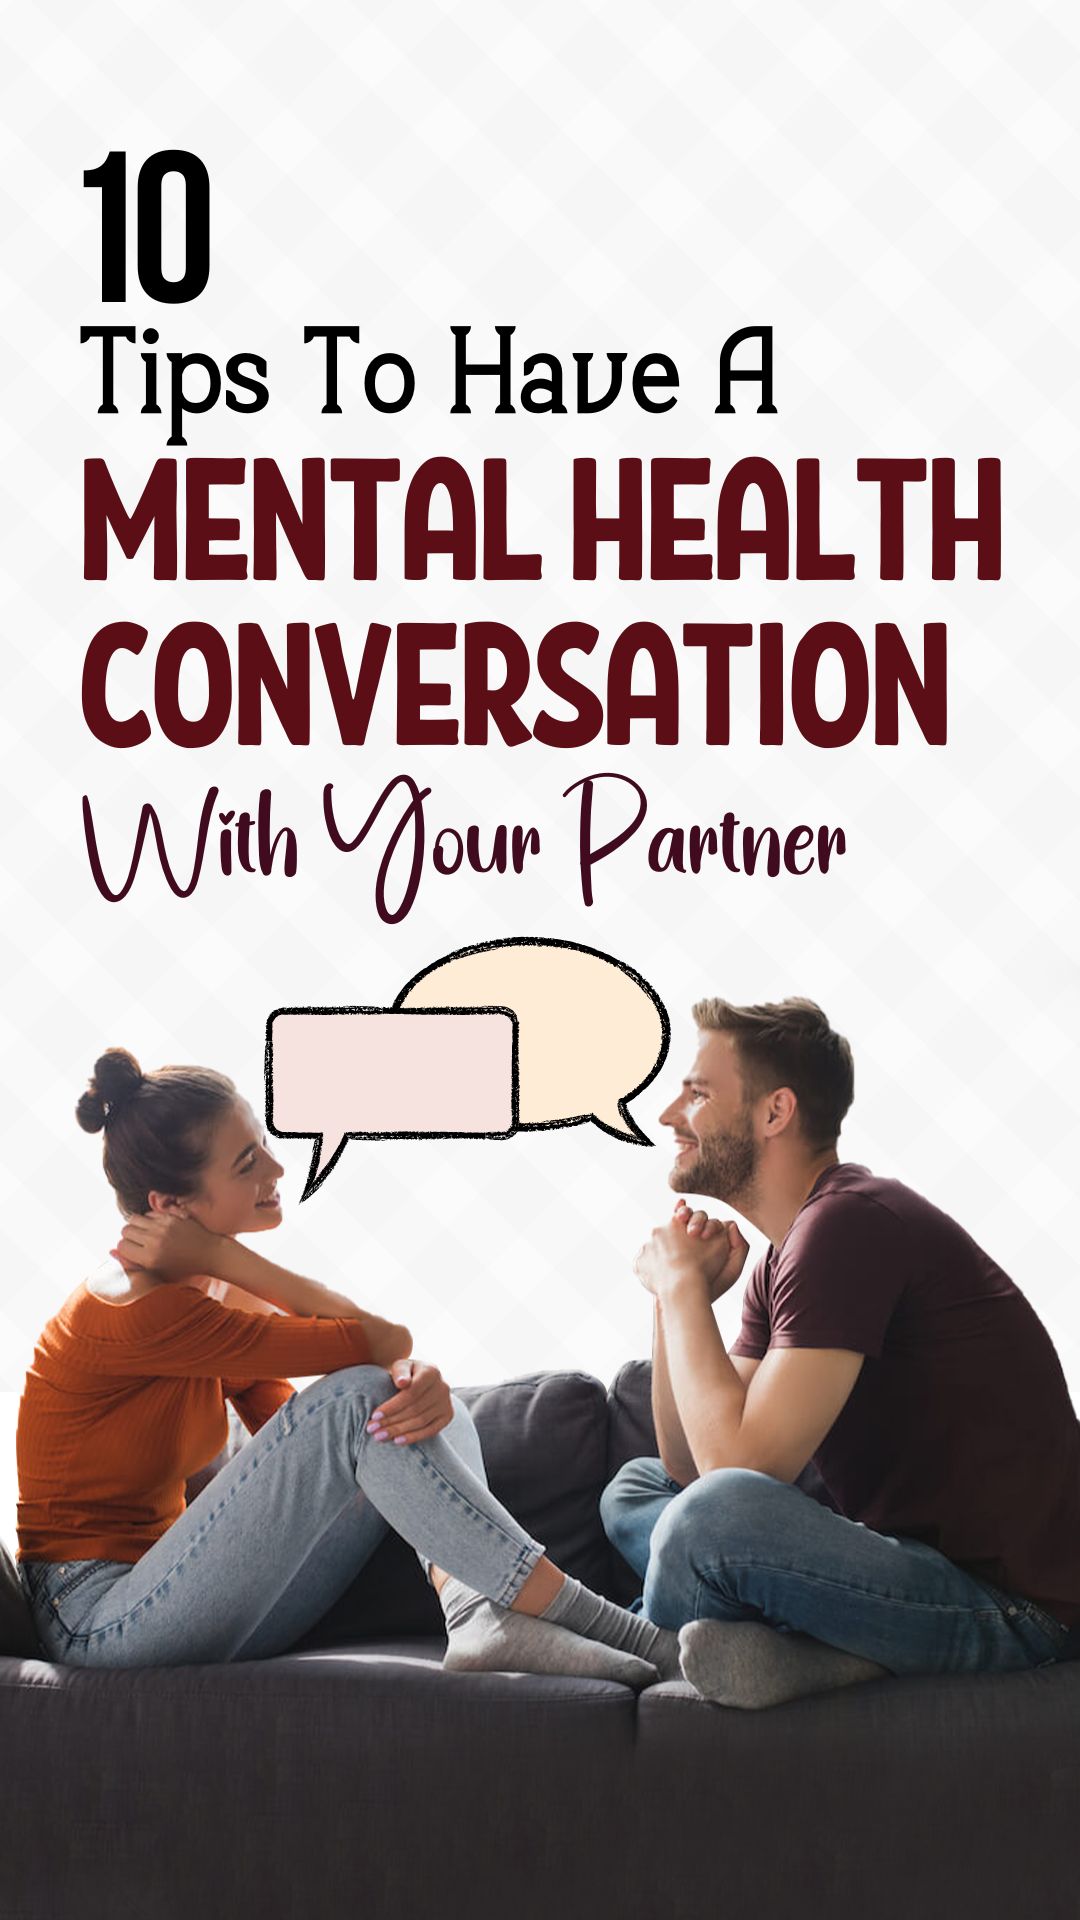 10 Tips To Have A Mental Health Conversation With Your Partner